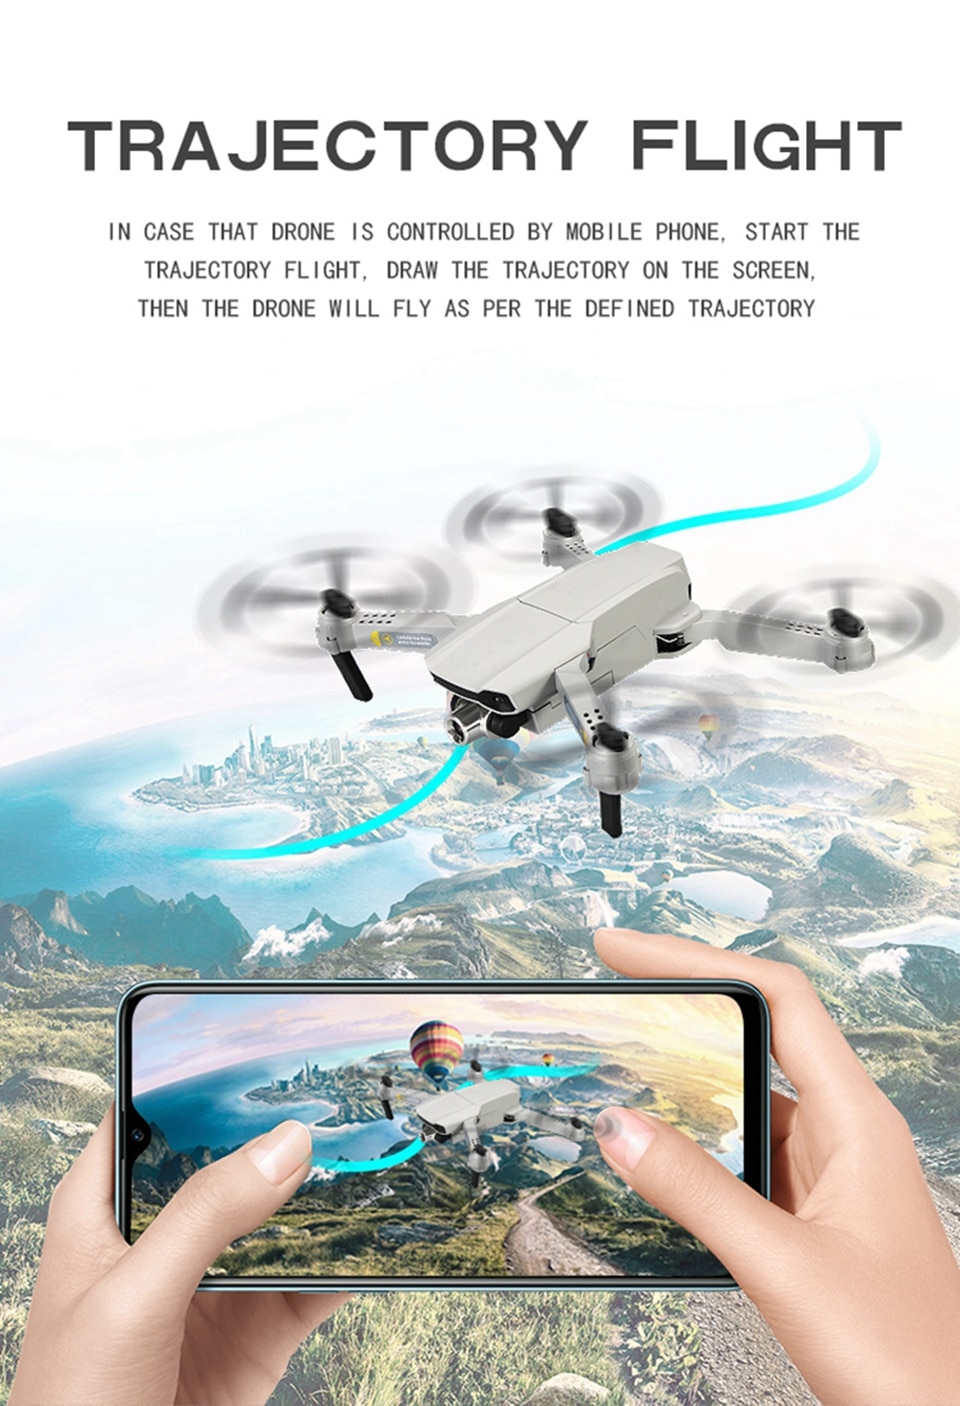 CSJ-X2-Drone-With-Camera-HD-4K-1080p-Quadcopter-FPV-Photography-WiFi-Helicopter-Remote-Control-Folda-1005001808043173